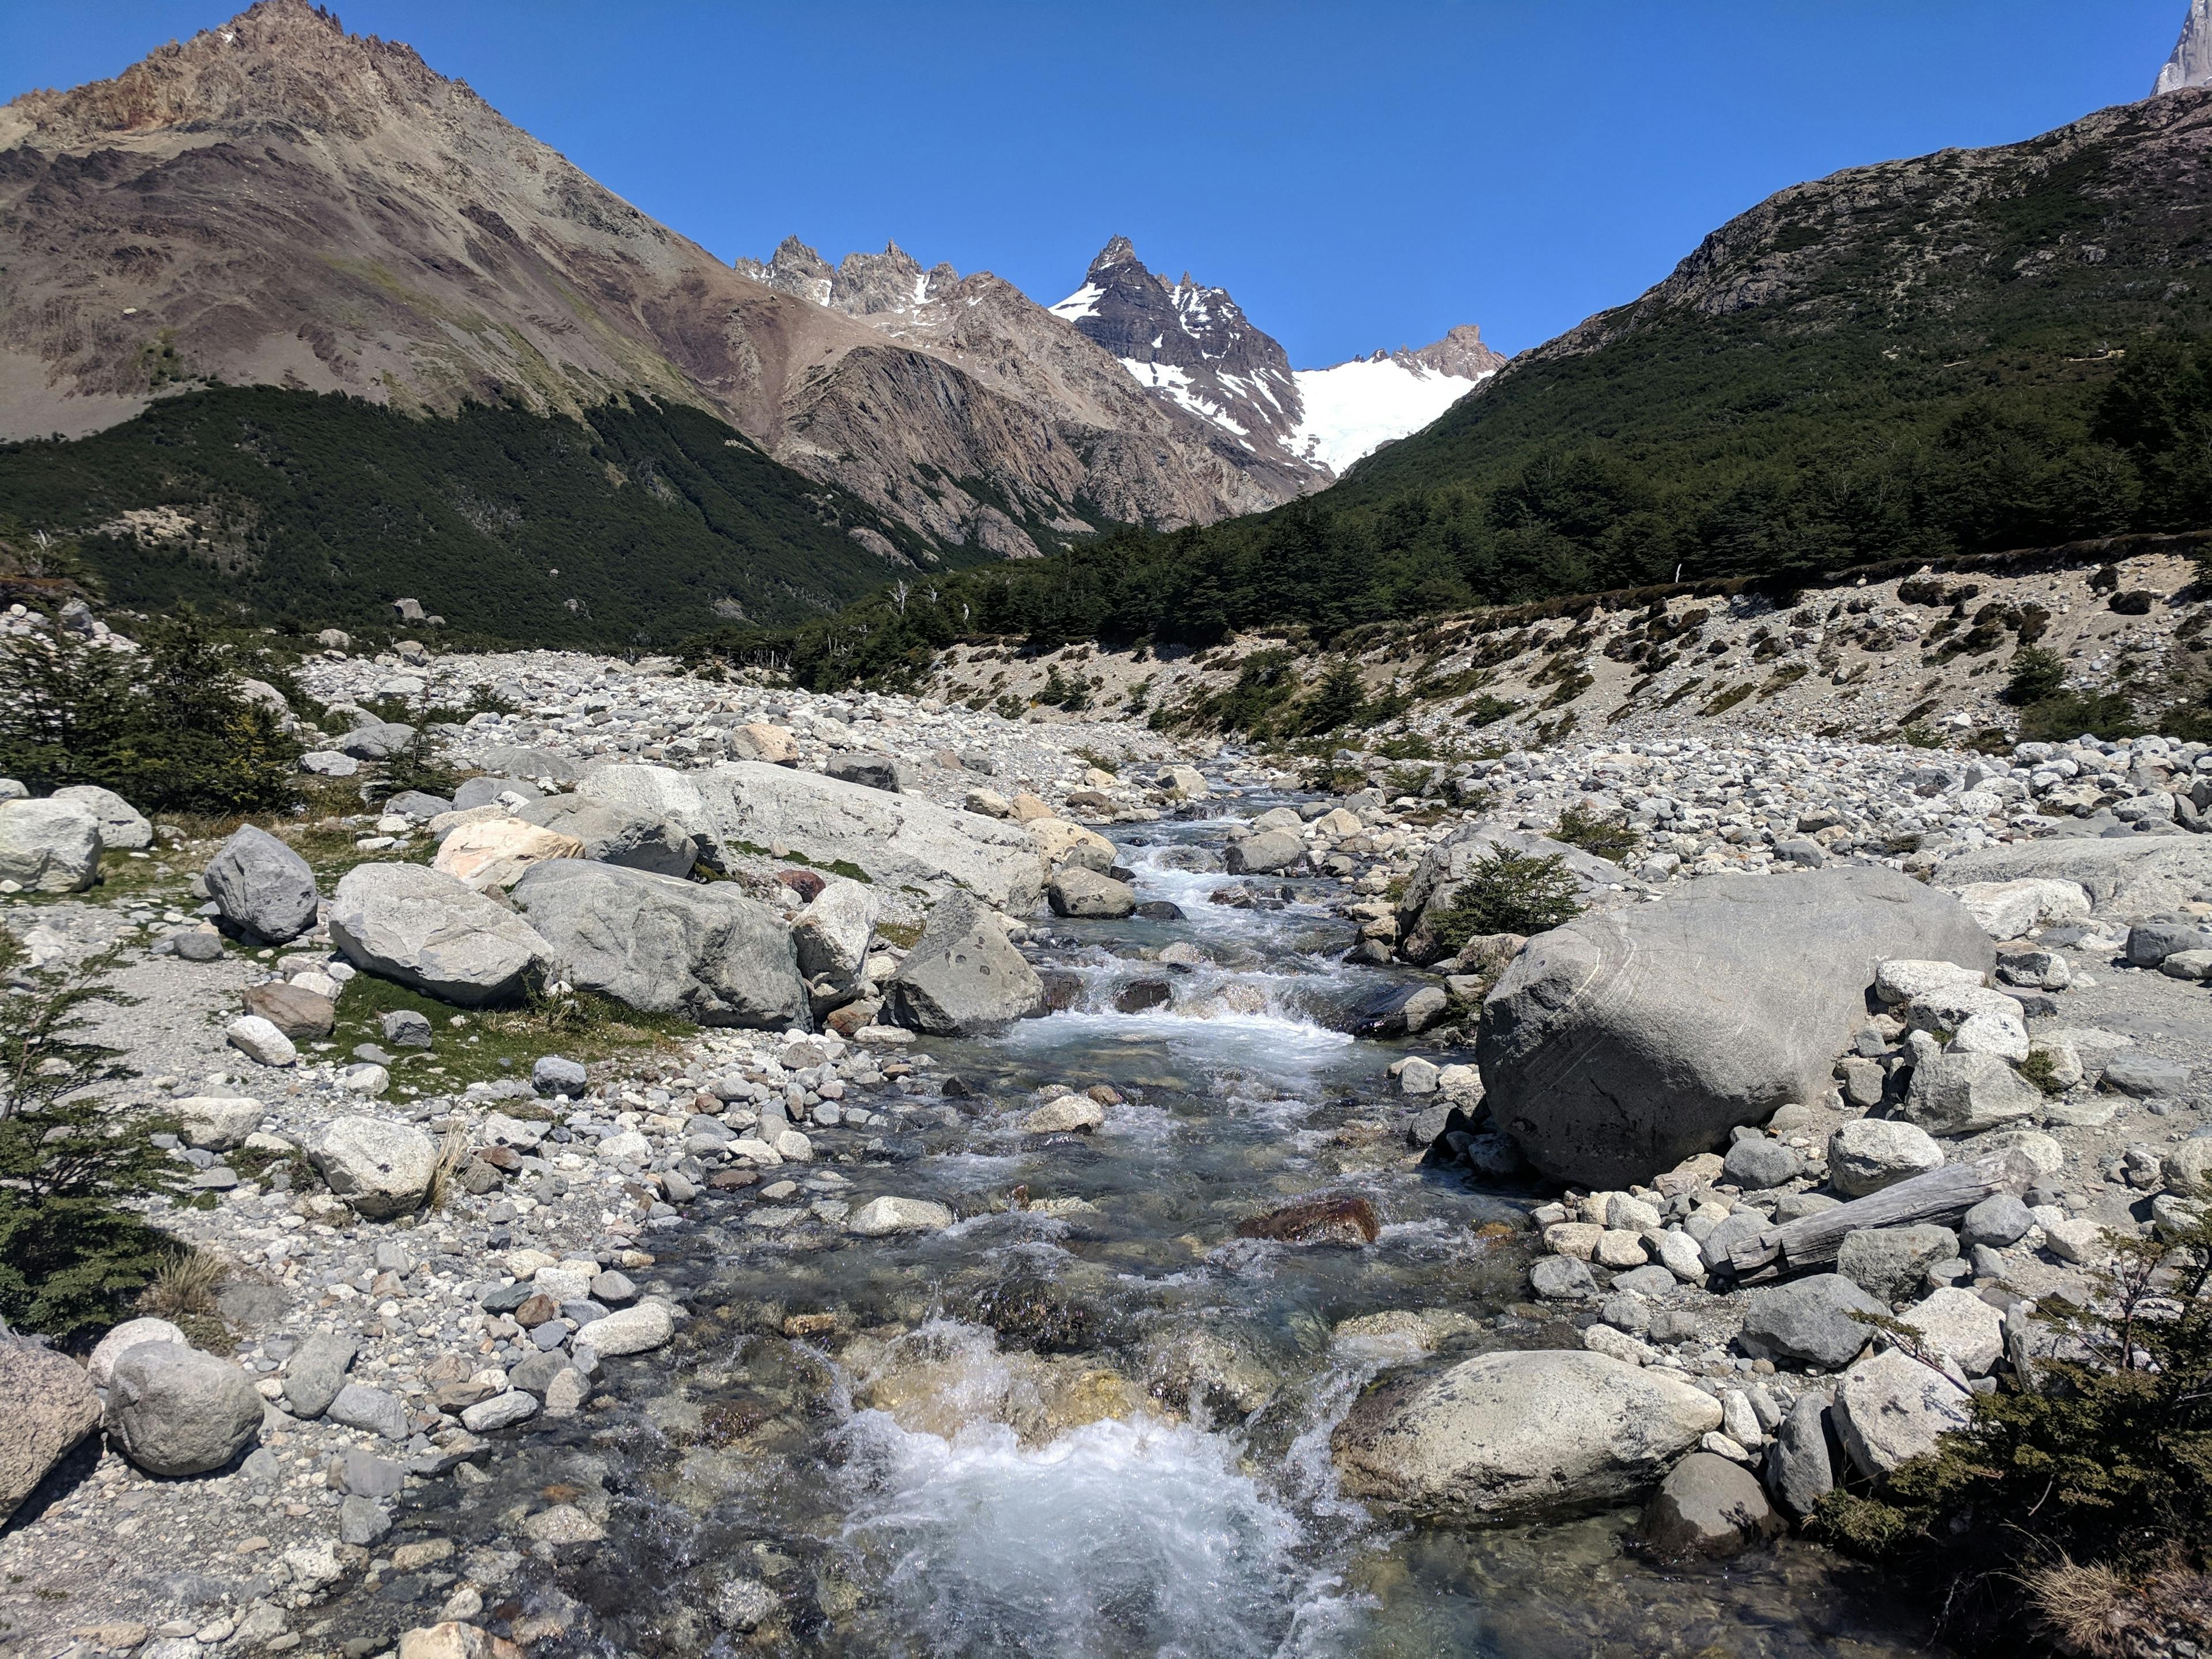 Glacier water flowing down the mountain